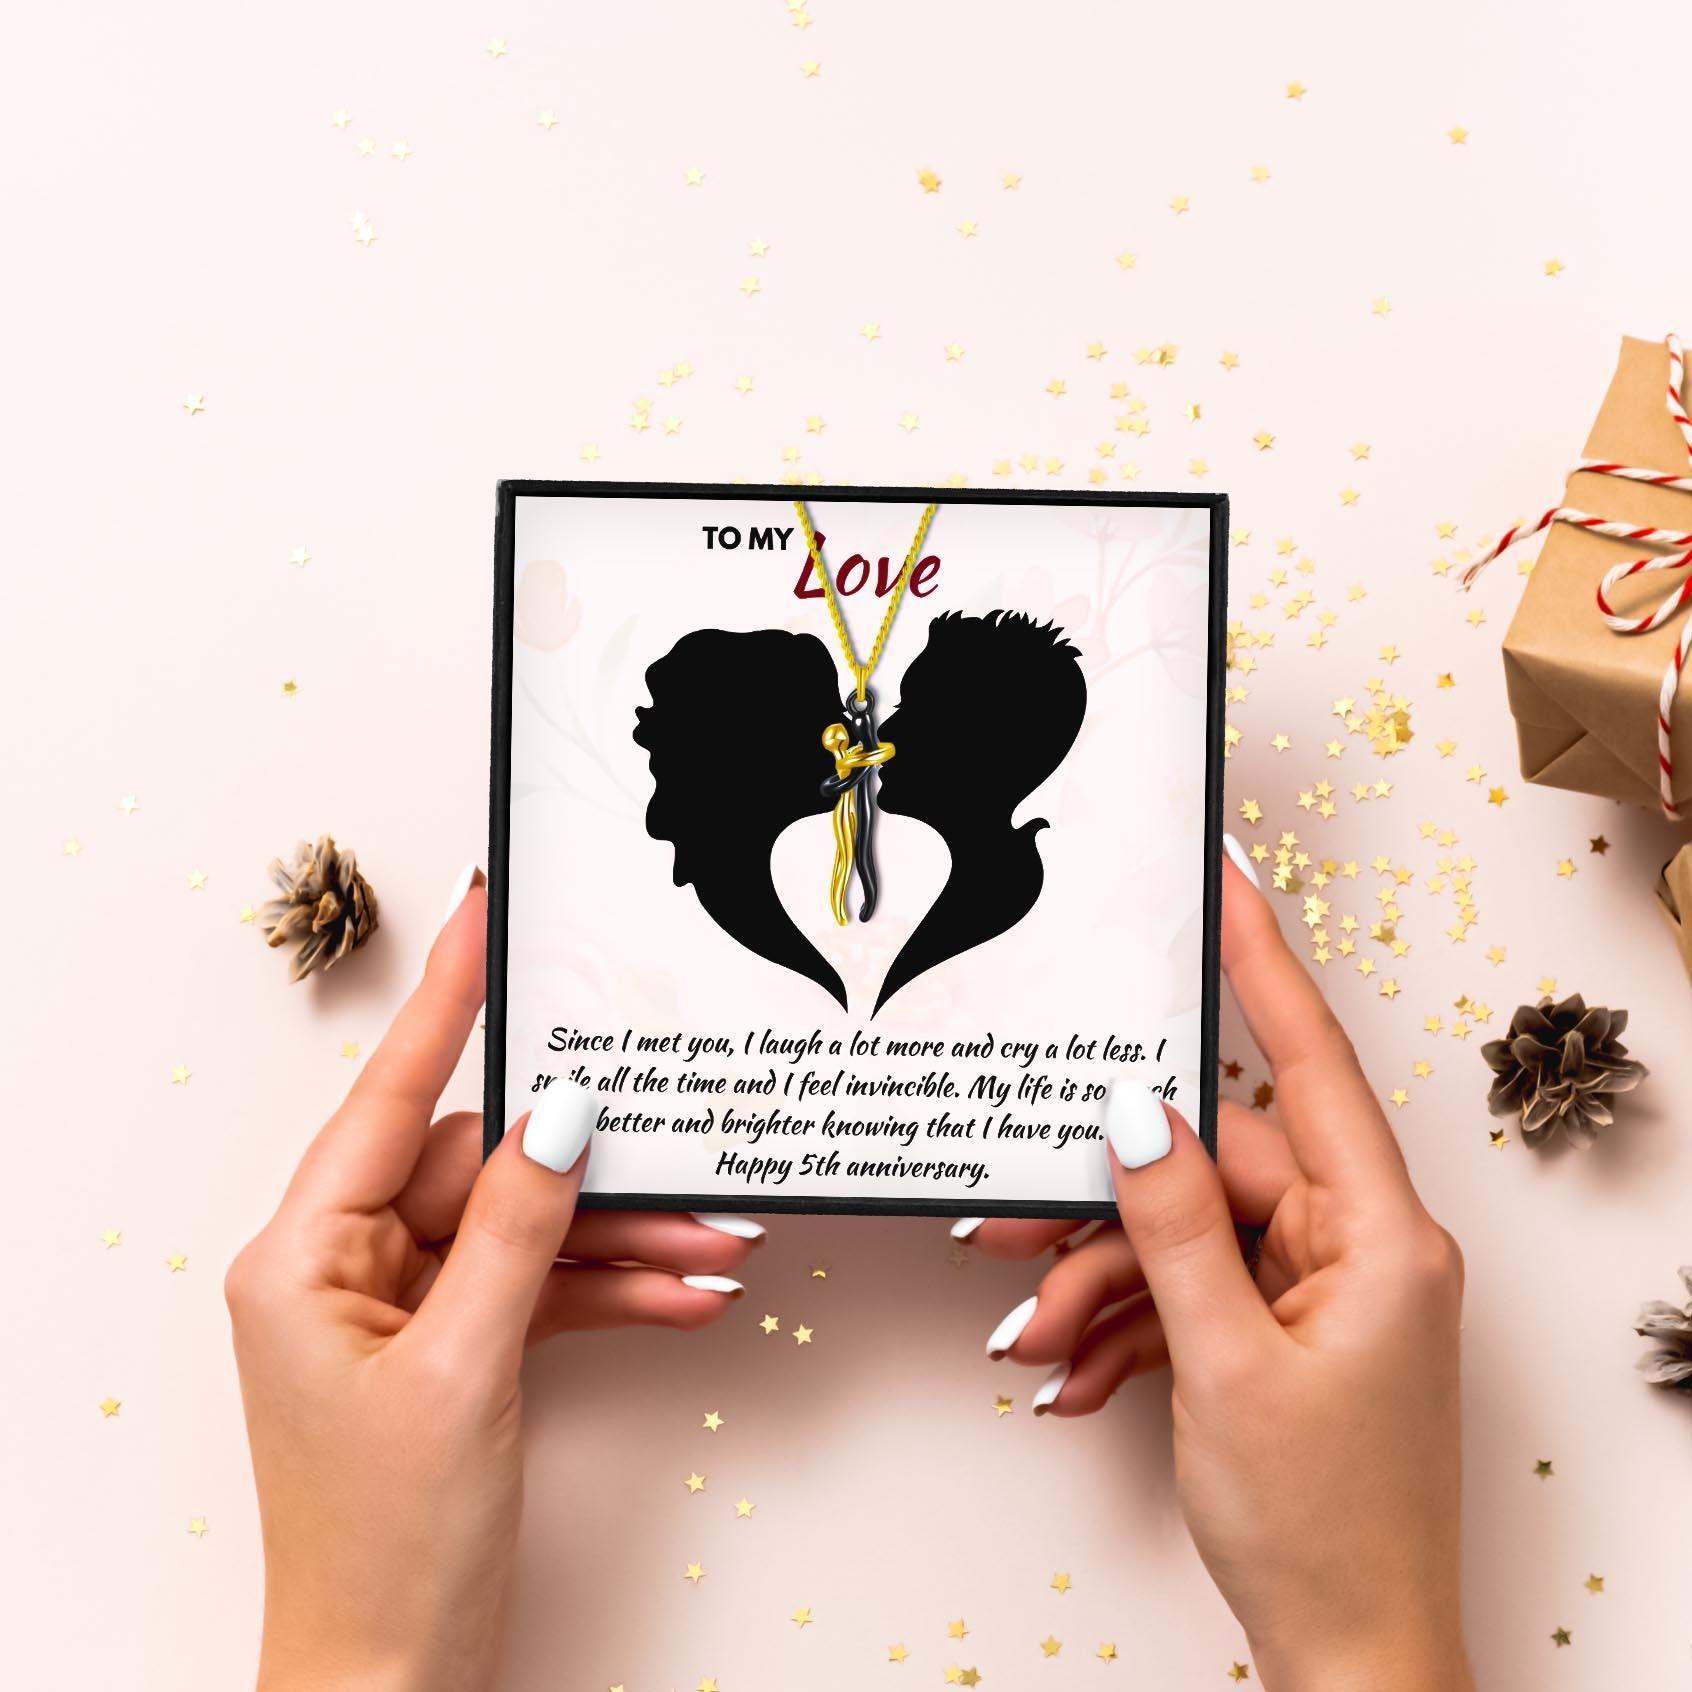 Fifth Anniversary Gifts to Celebrate Your Love in 2023 | Fifth Anniversary Gifts to Celebrate Your Love - undefined | 5th anniversary gift for her, fifth wedding anniversary gift, five year anniversary, five year wedding anniversary gift, Hug Necklace | From Hunny Life | hunnylife.com